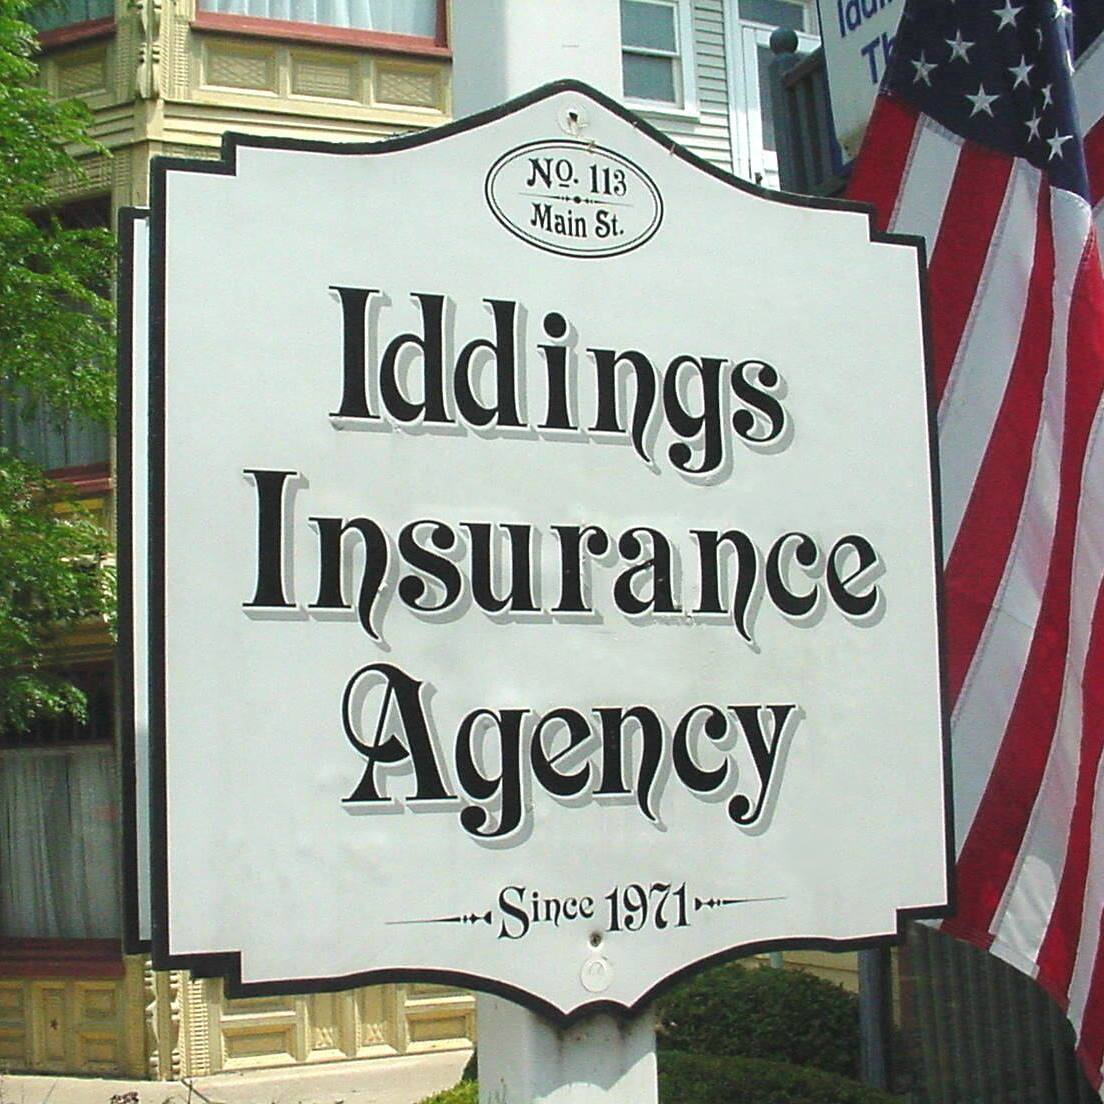 Iddings Insurance Agency Sign